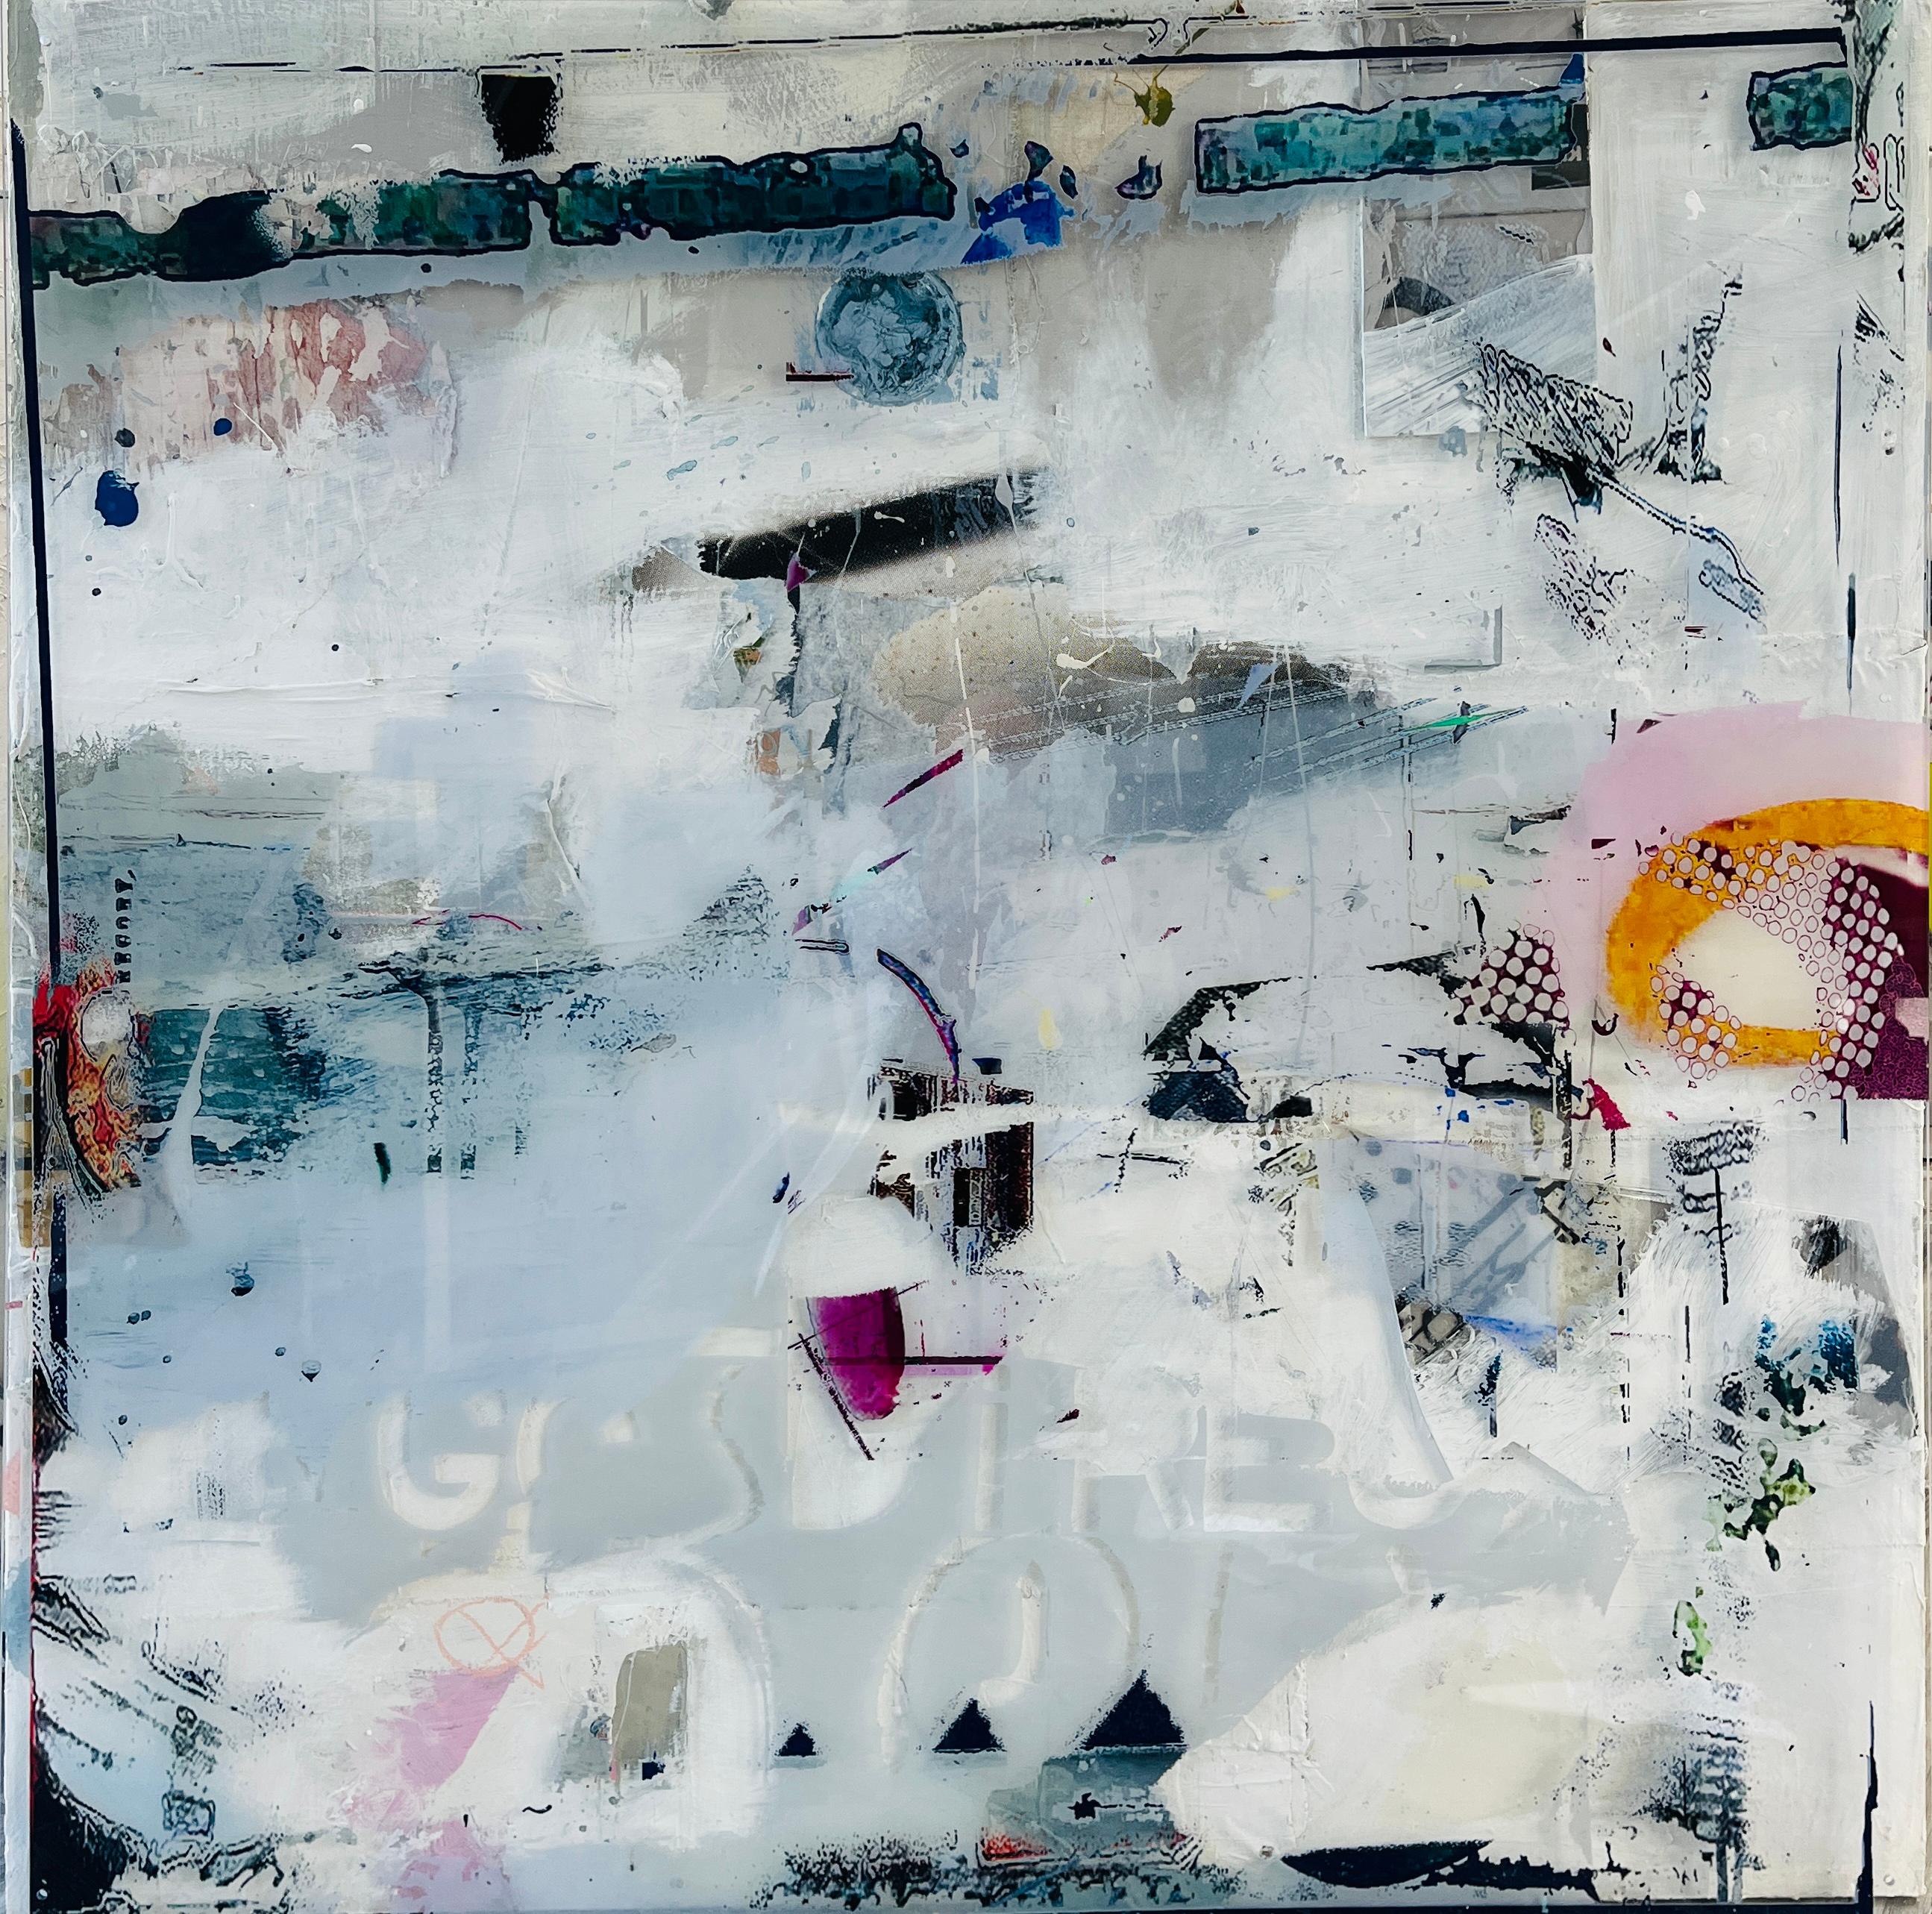 Gregory Watin
Iced
Mixed media on plexiglass and wood
52 x 52 inches (132 x 132 cm)